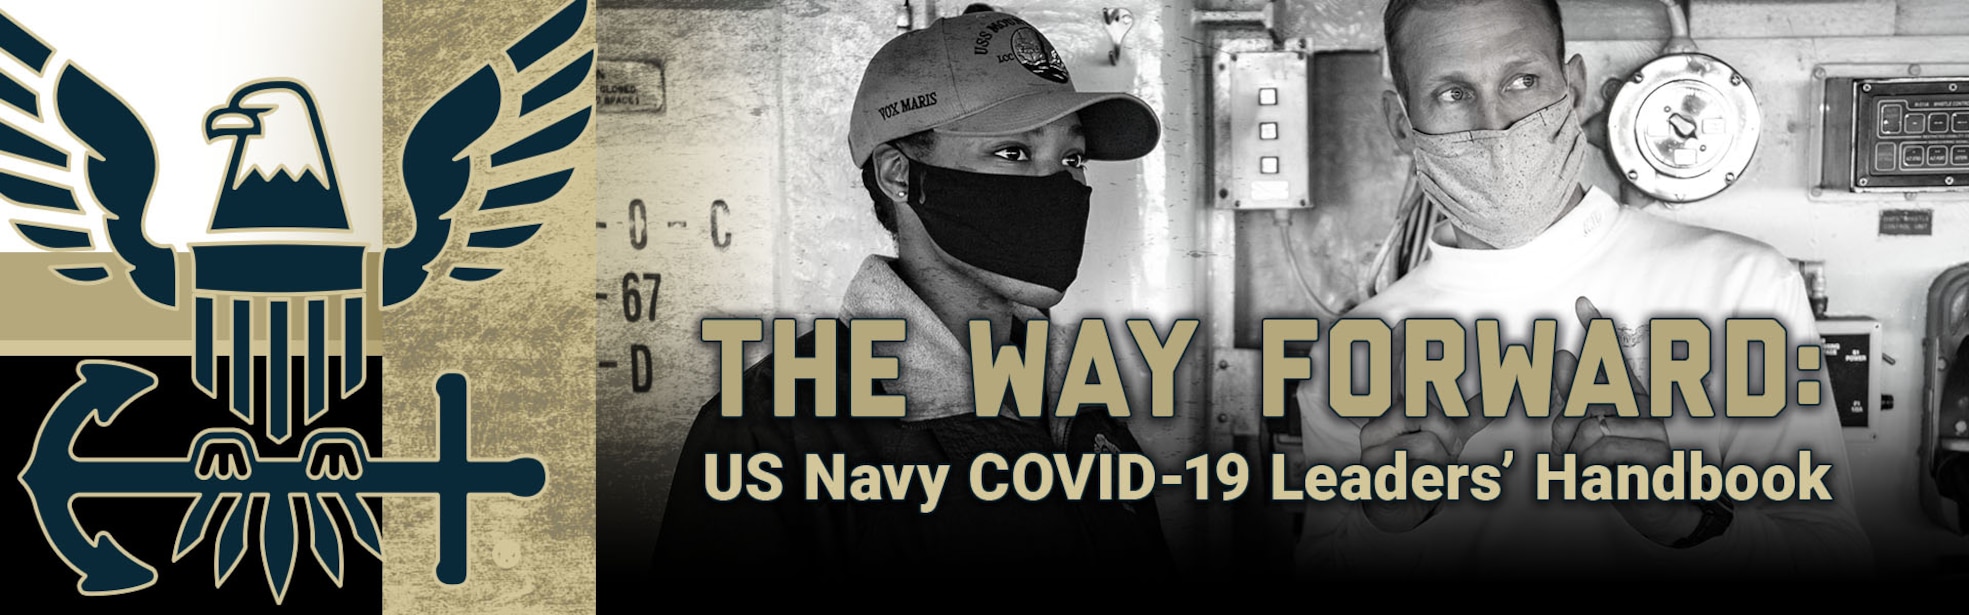 The Way Forward: US Navy Leadership COVID Handbook banner showing sailors wearing mask and navy colored blue with gold accent